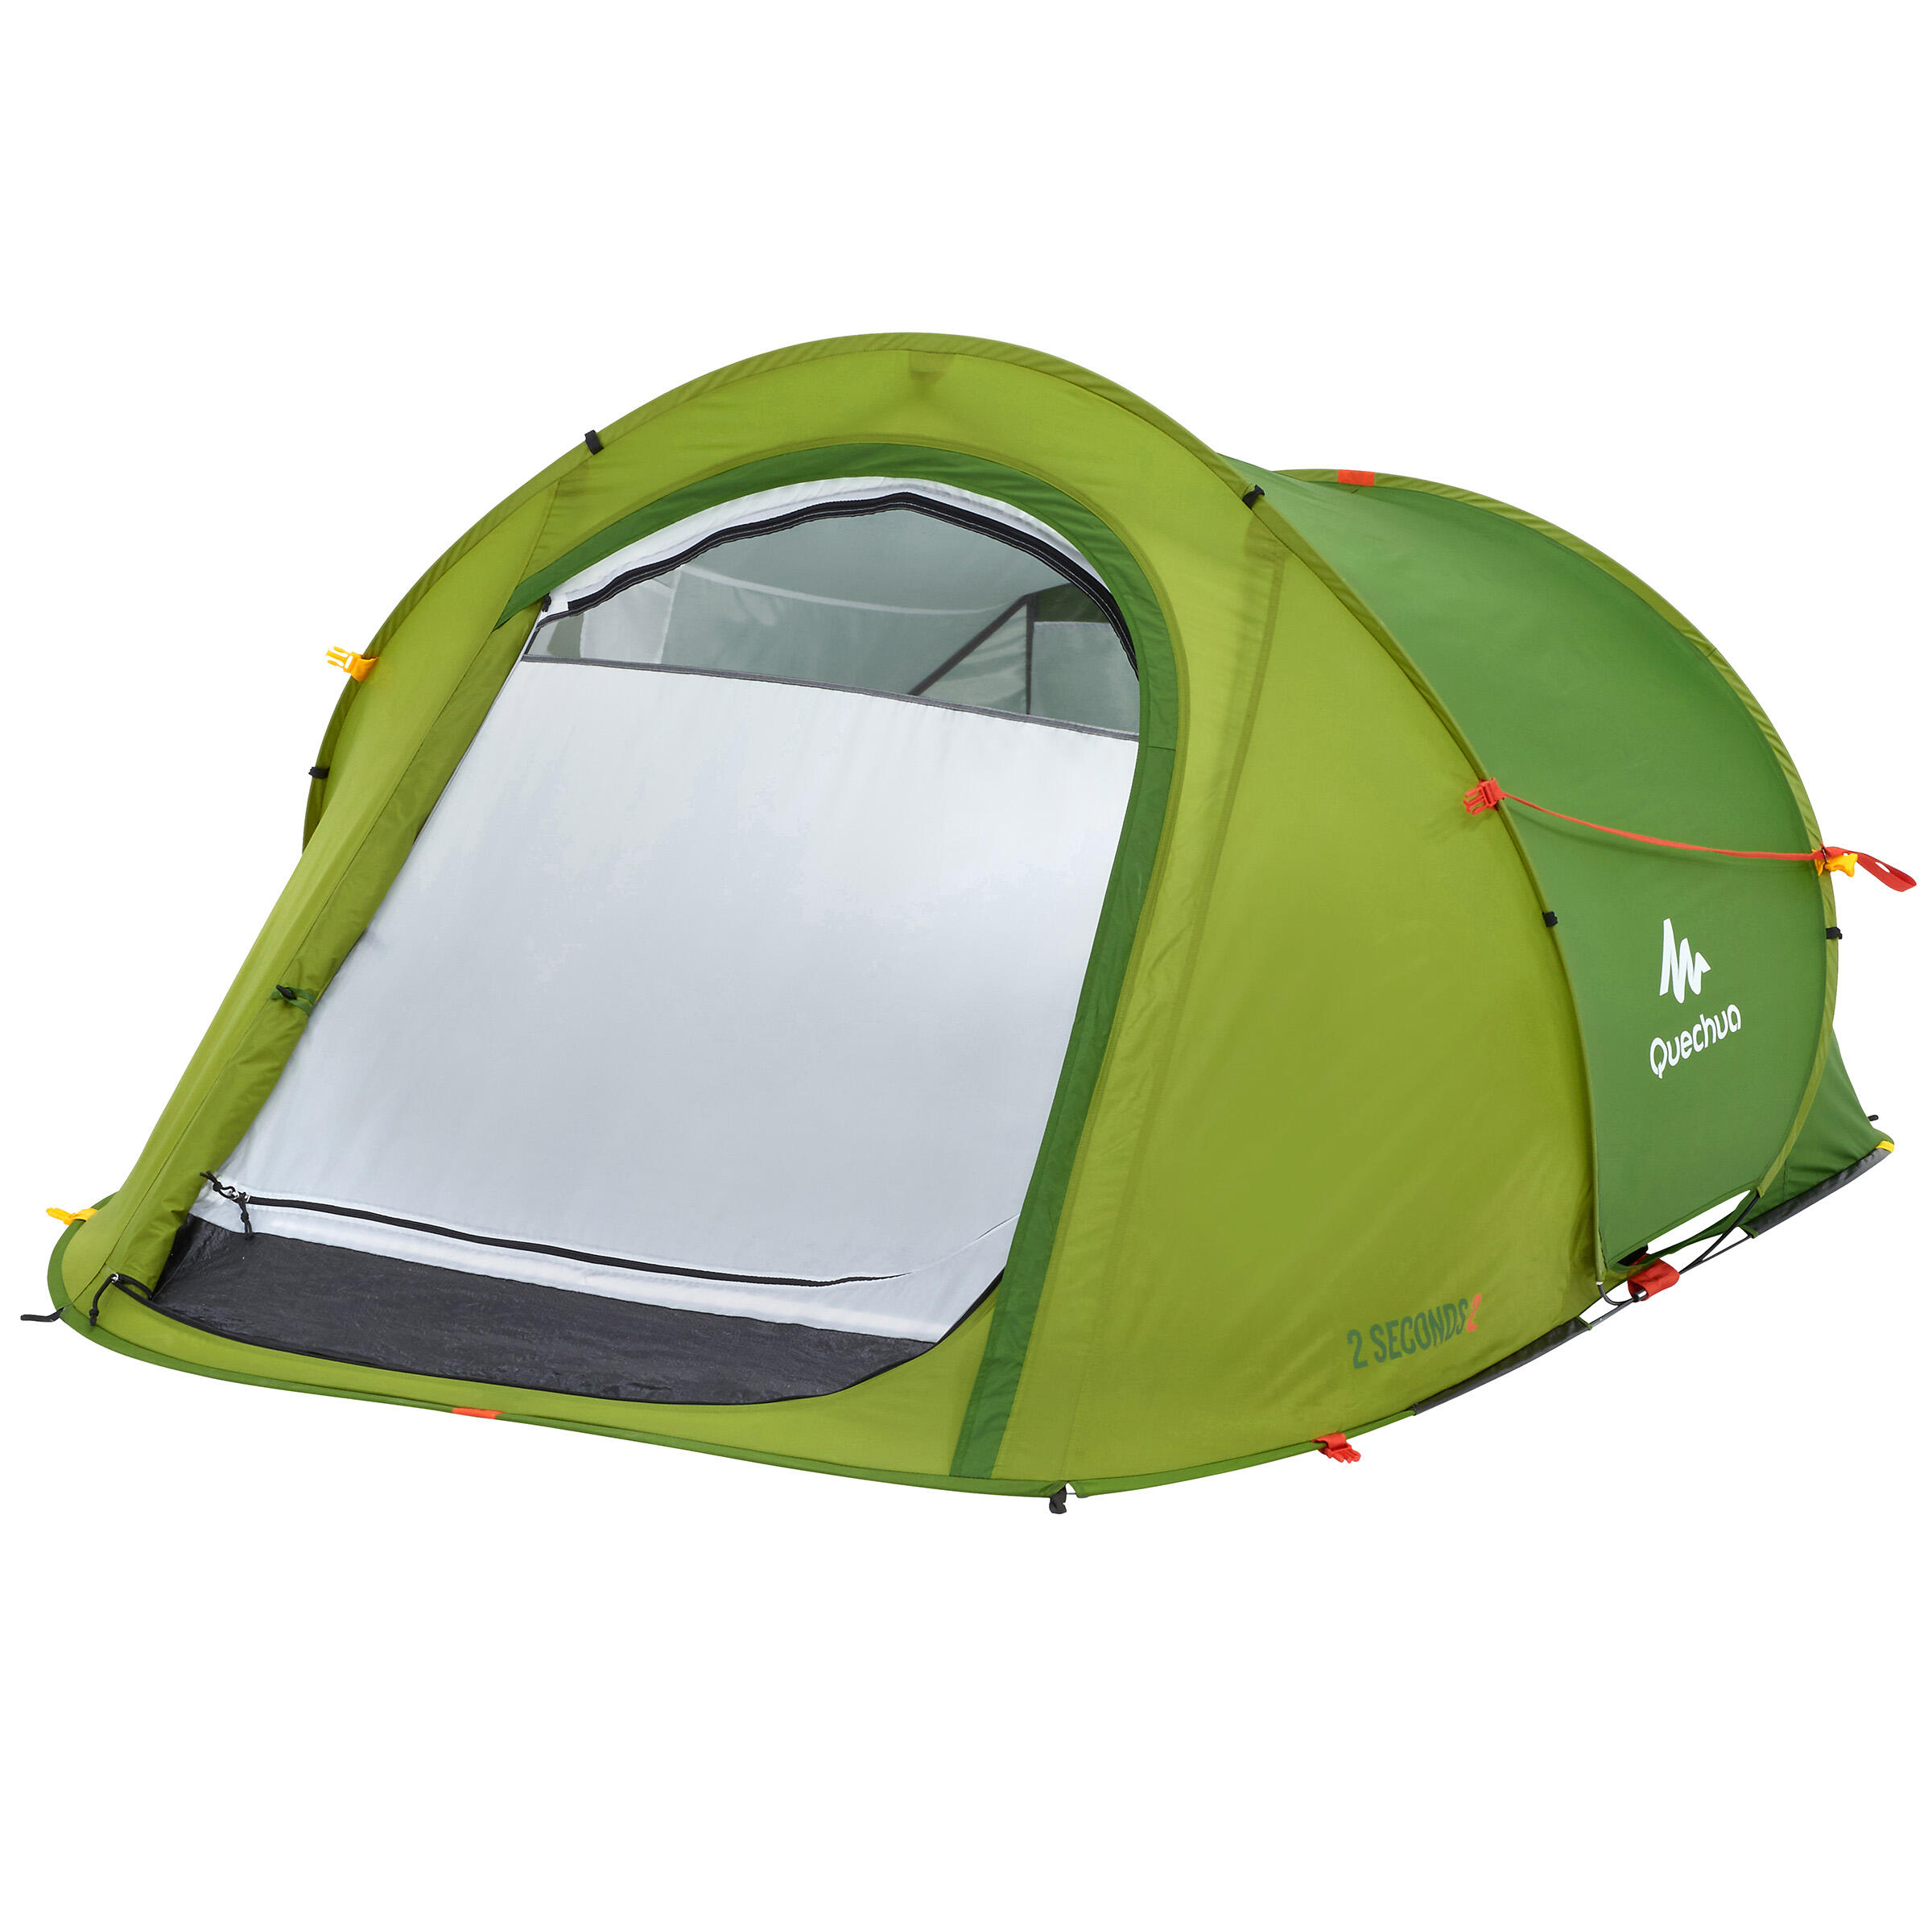 2 SECONDS camping tent | 2 person green 7/17